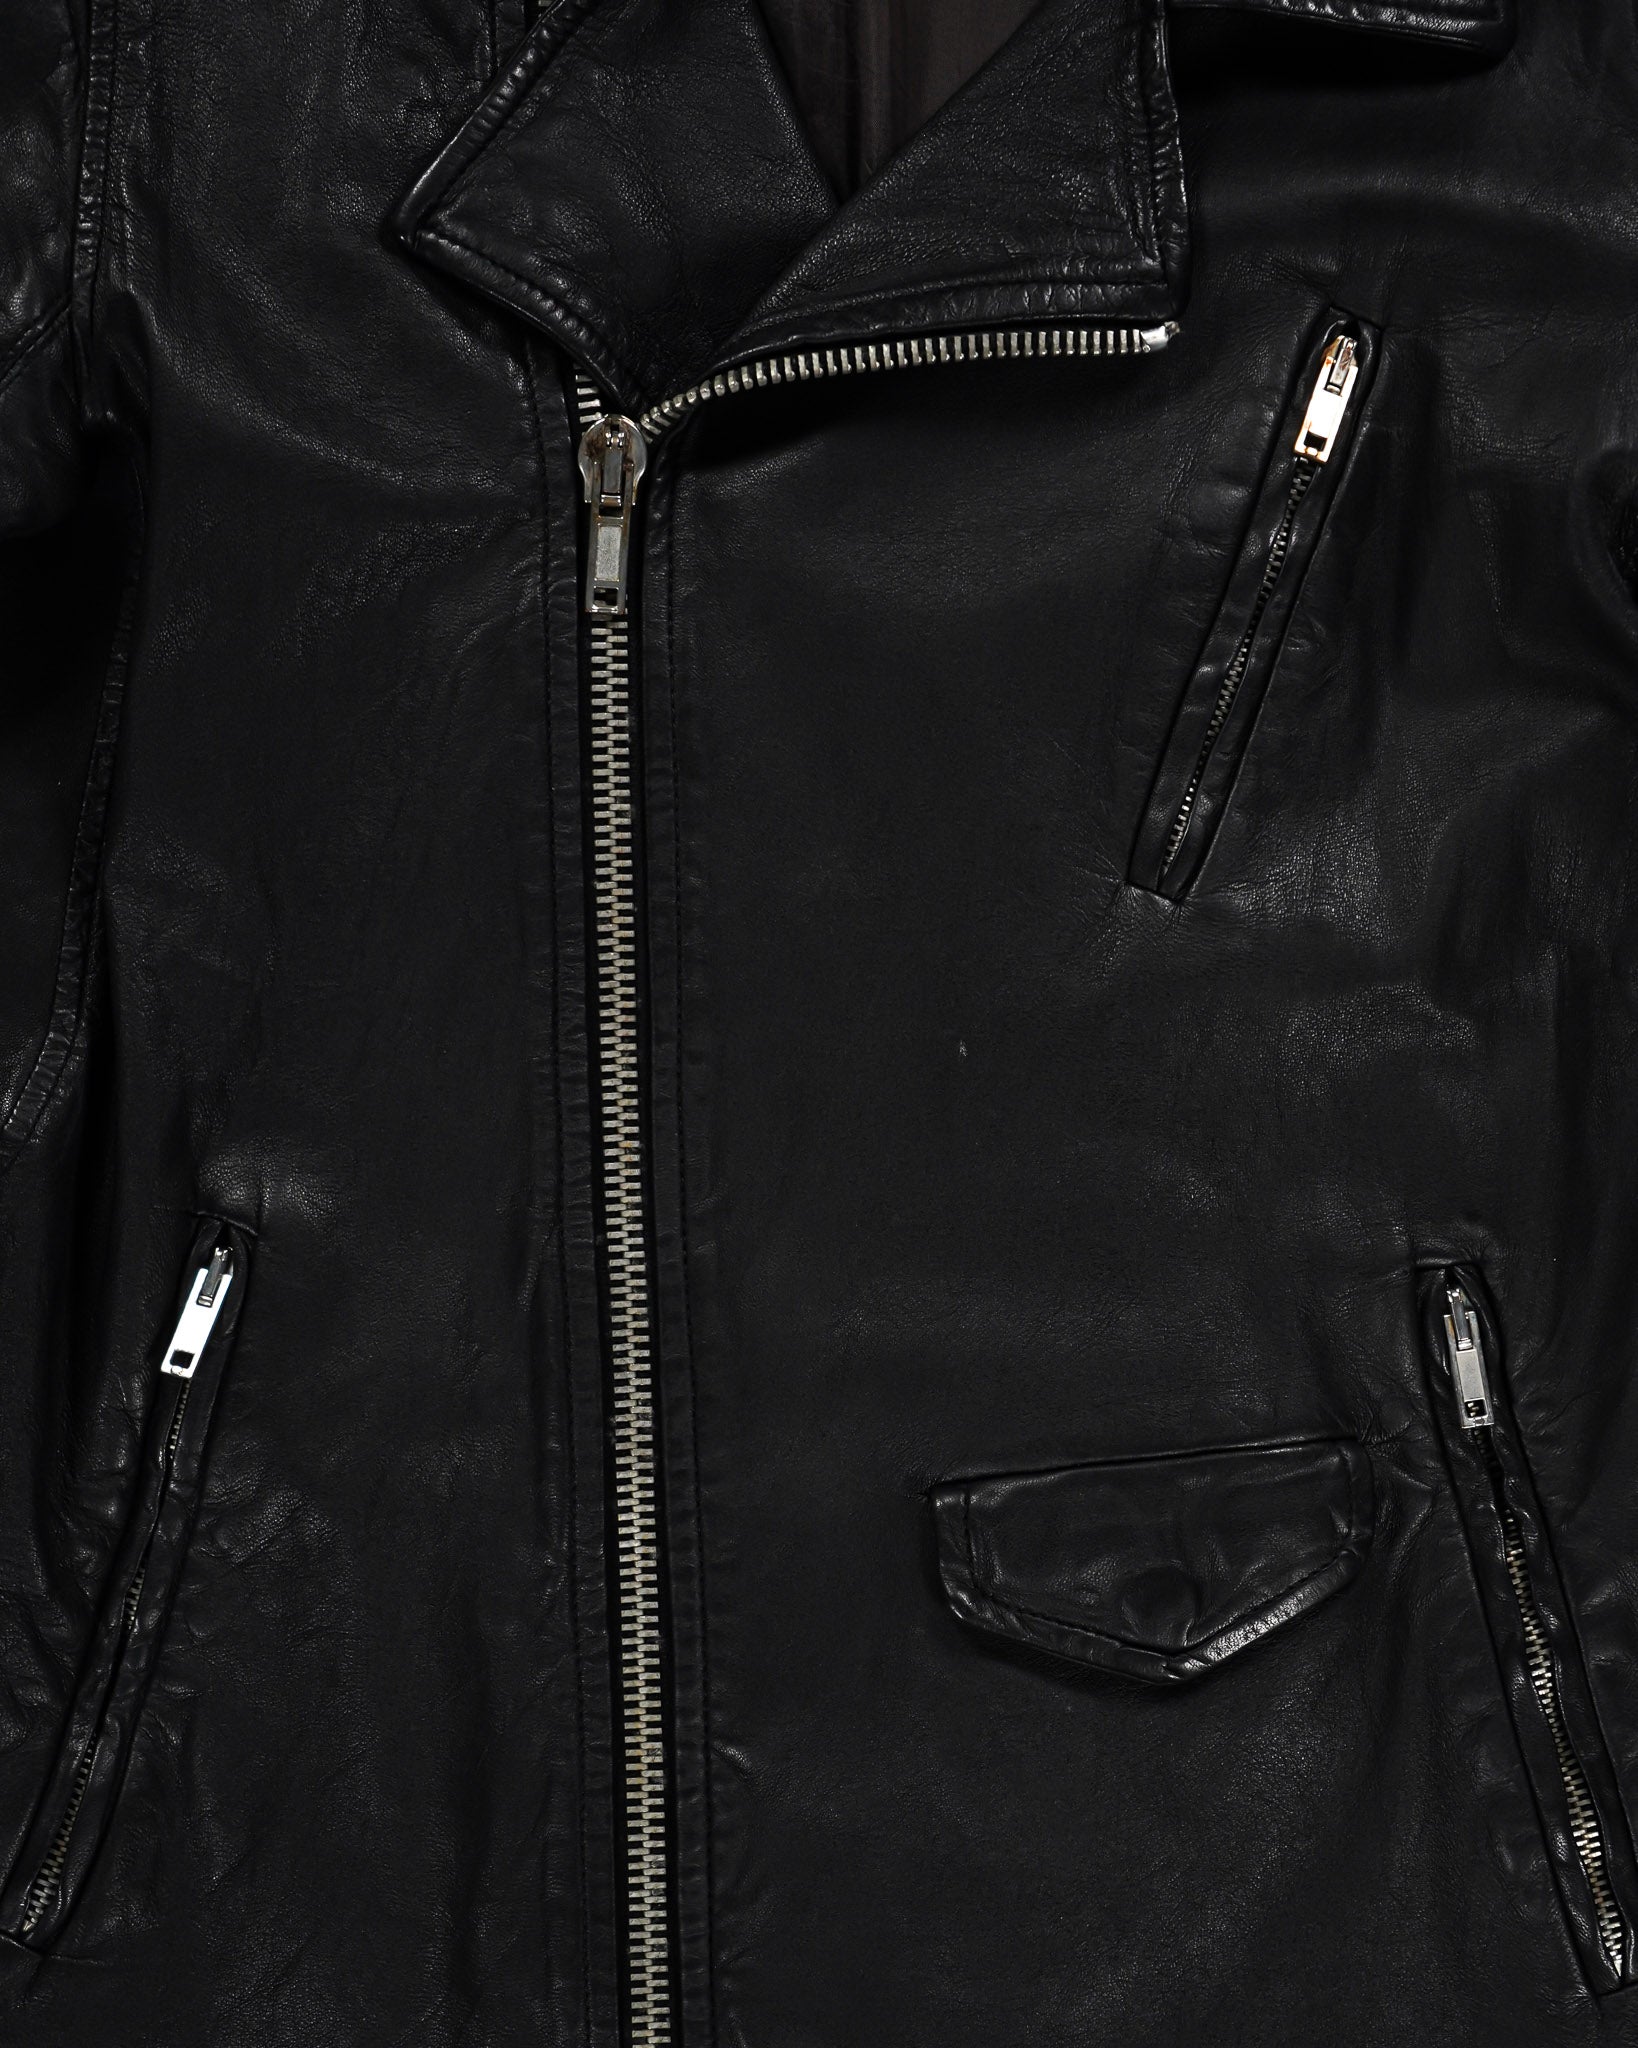 Rick Owens “Stooges” Runway Leather Jacket - SS08 “Creatch”